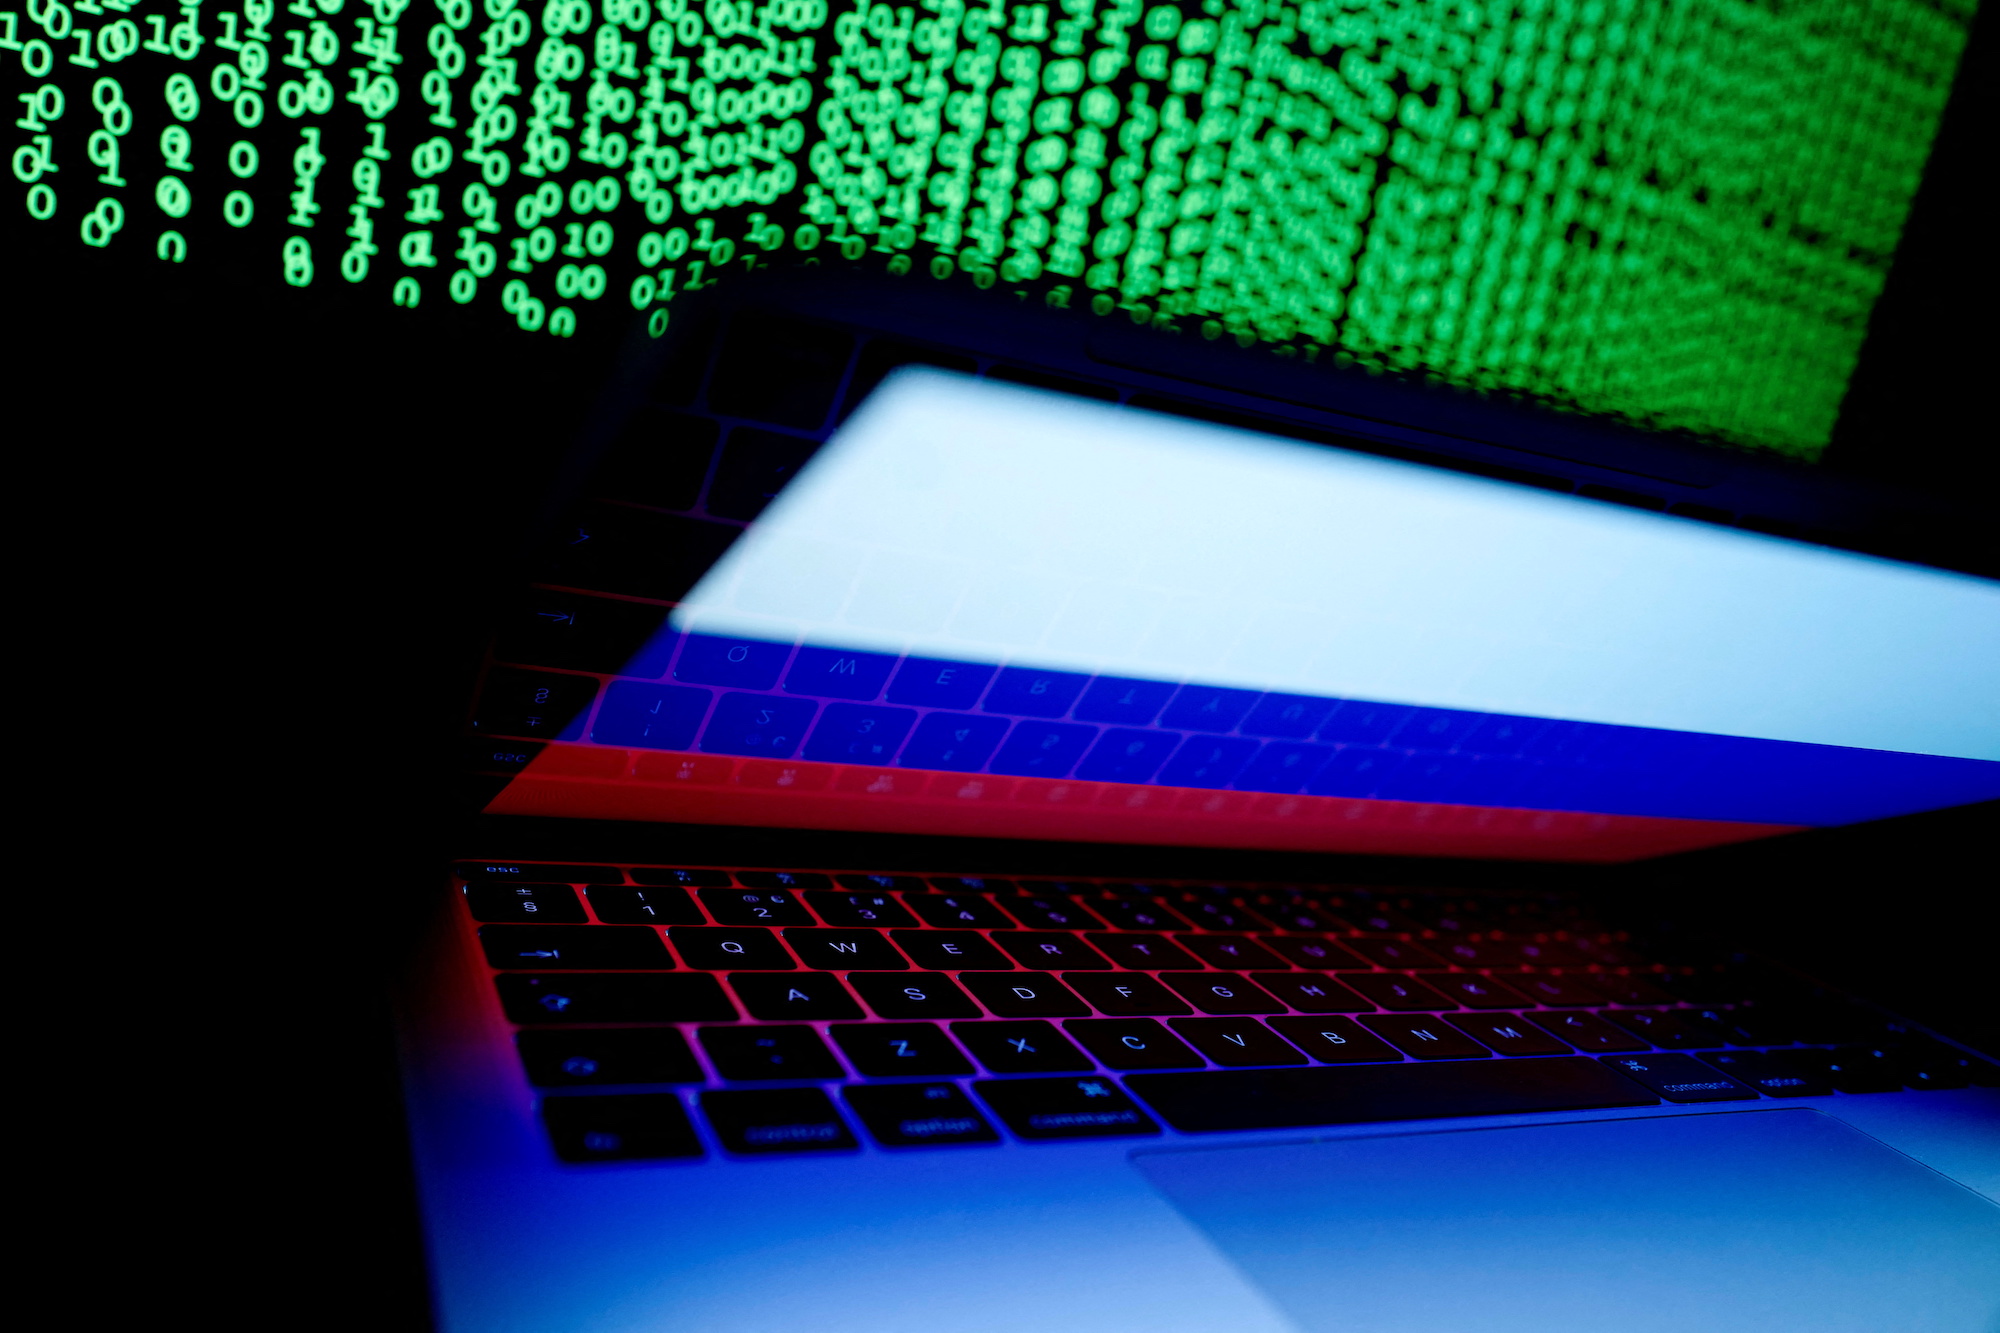 A Russian flag is seen on the laptop screen in front of a computer screen on which cyber code is displayed, in this illustration picture taken March 2, 2018